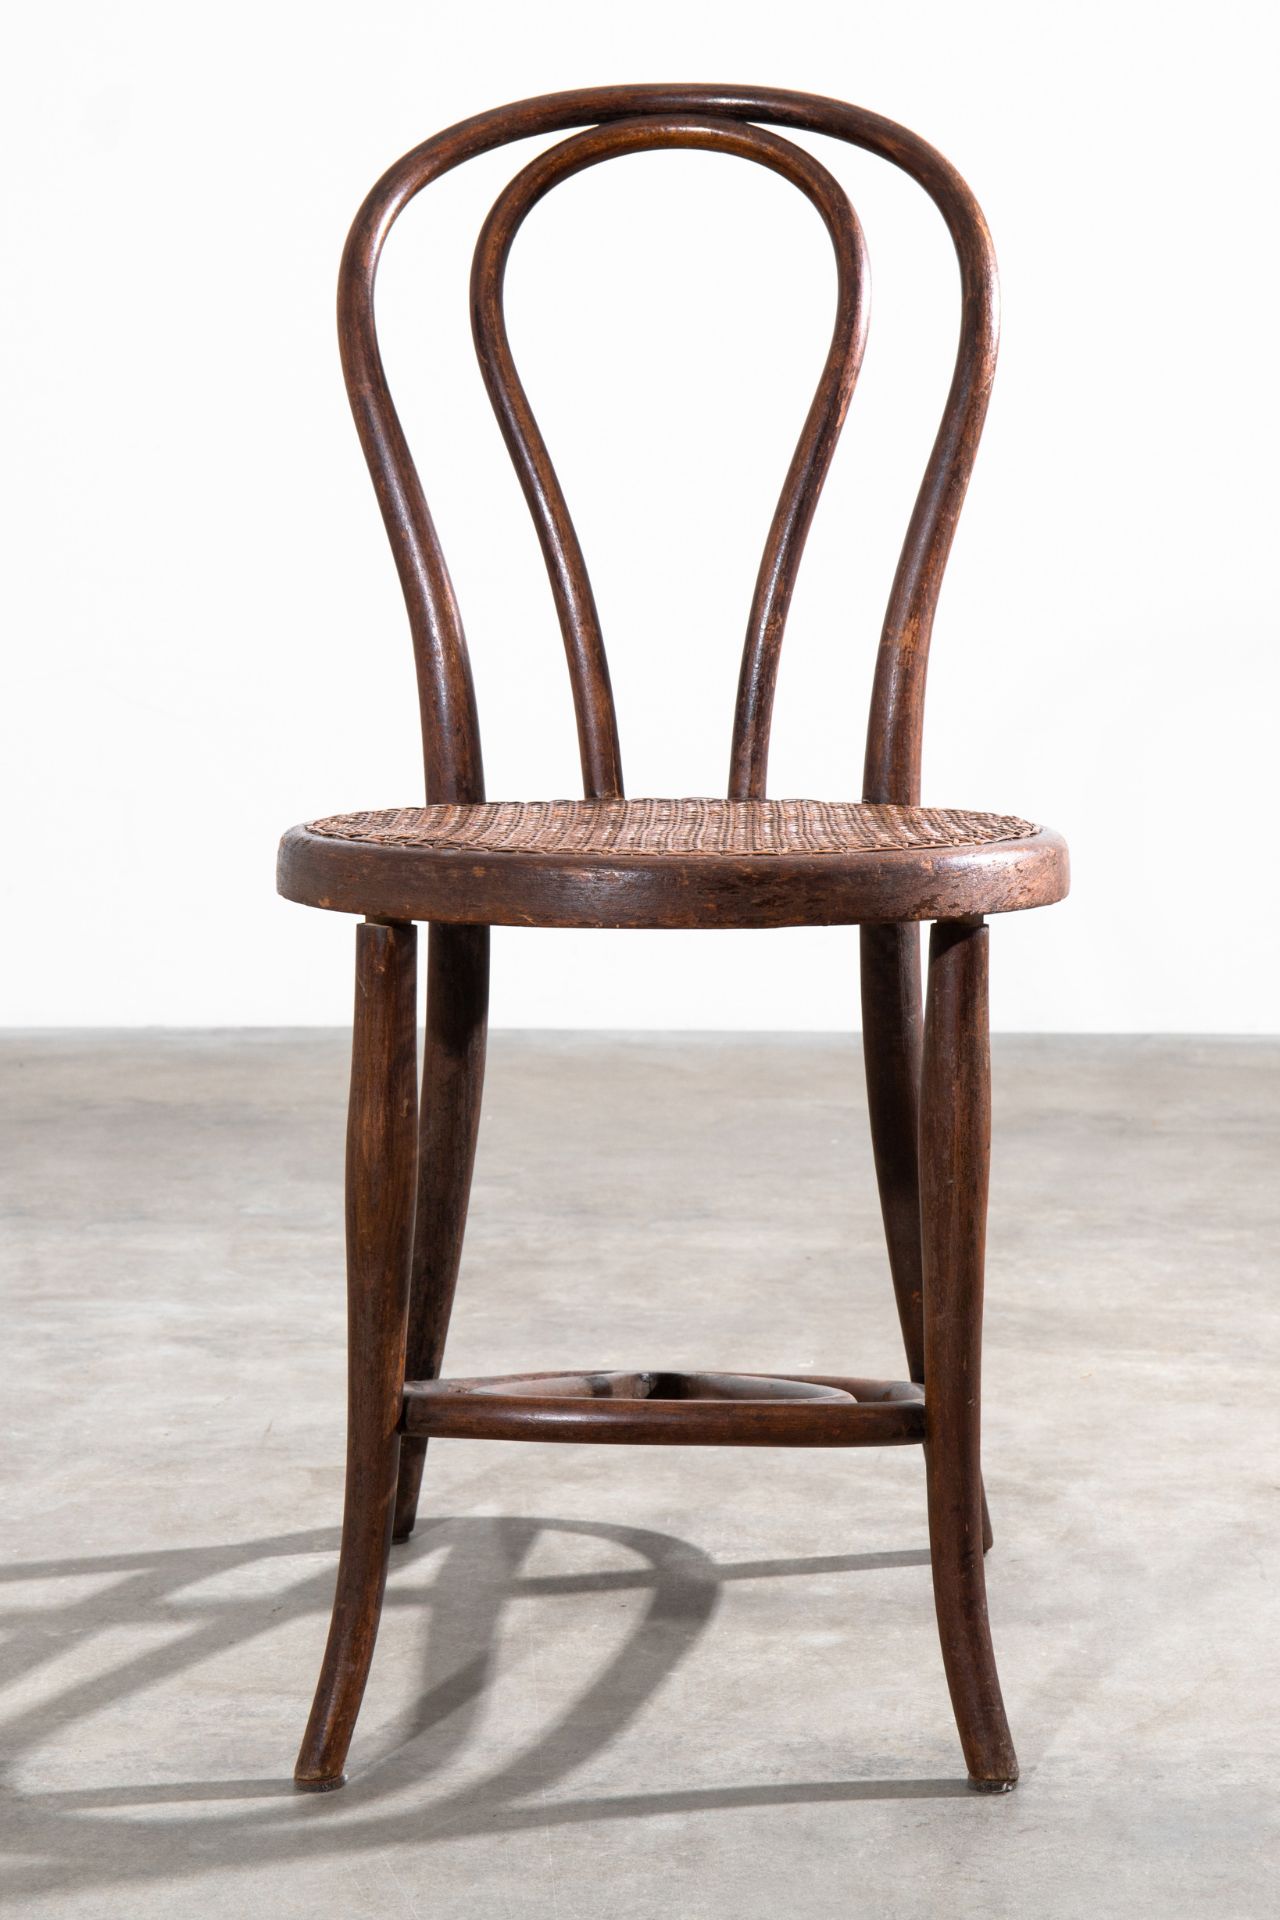 Thonet chair no. 18 with boot jack - Image 3 of 8